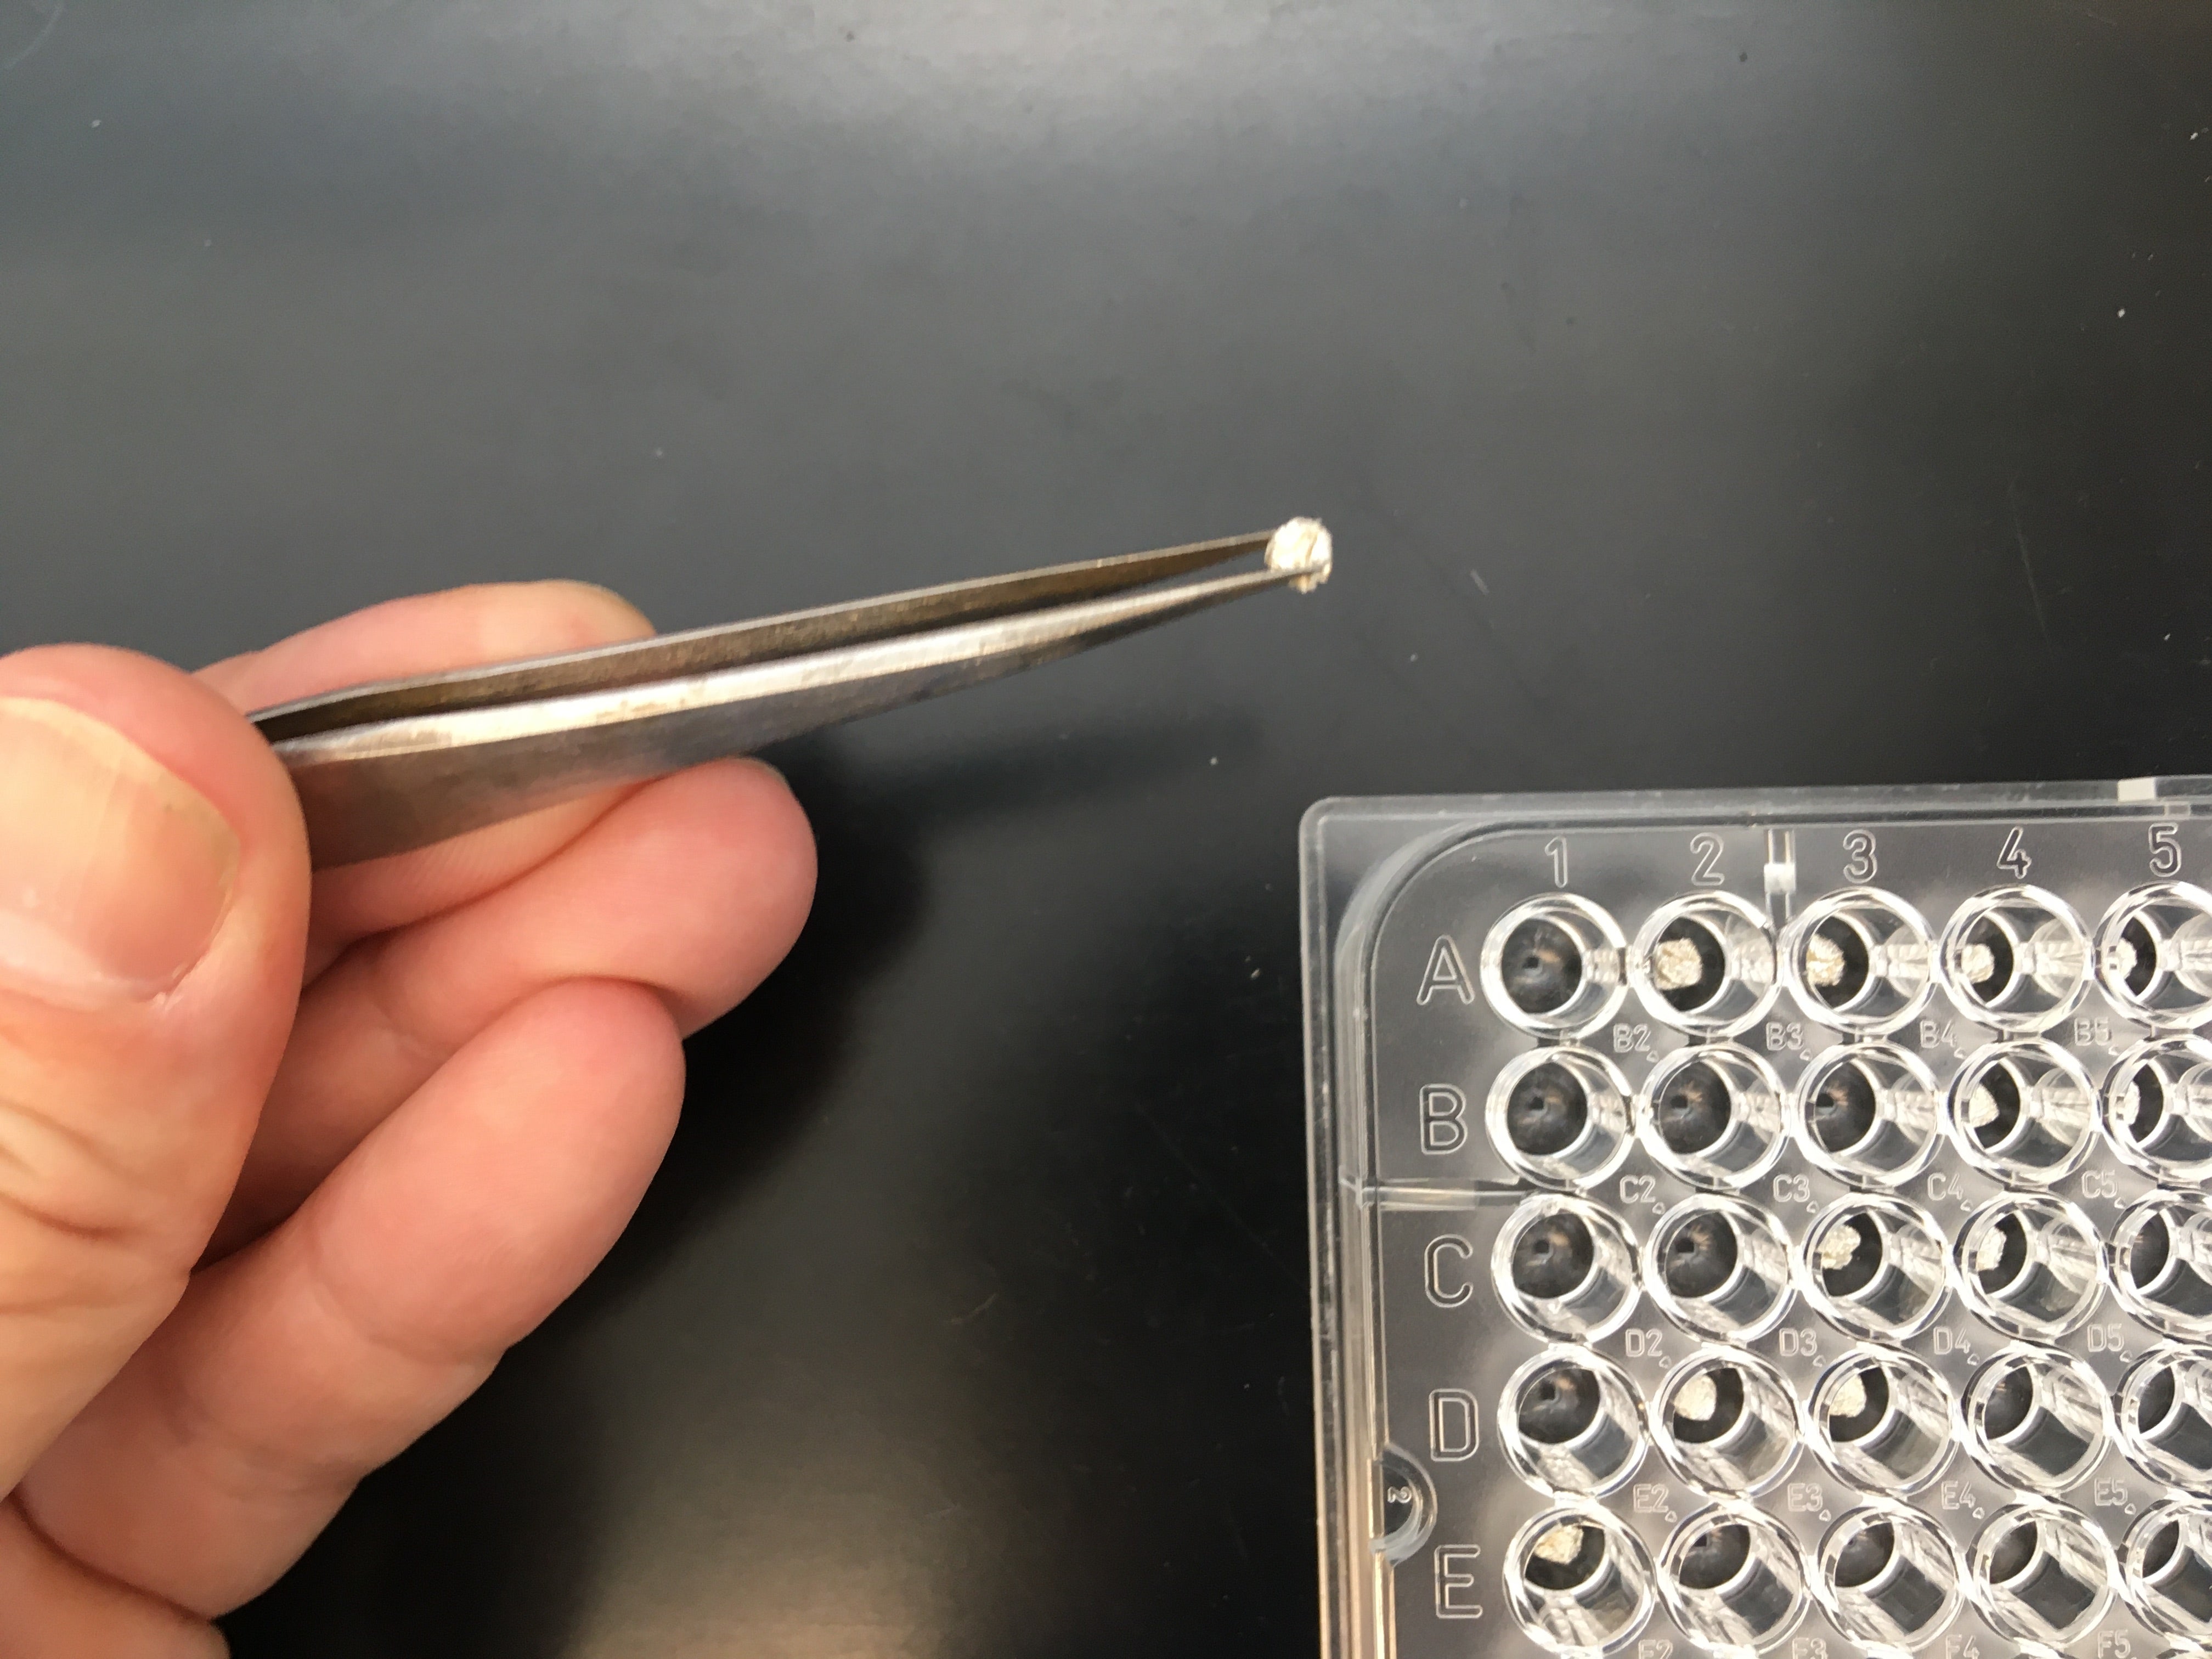 A small 3-5 mm spherical tin capsule held by forceps, a 96-well plate in the backround